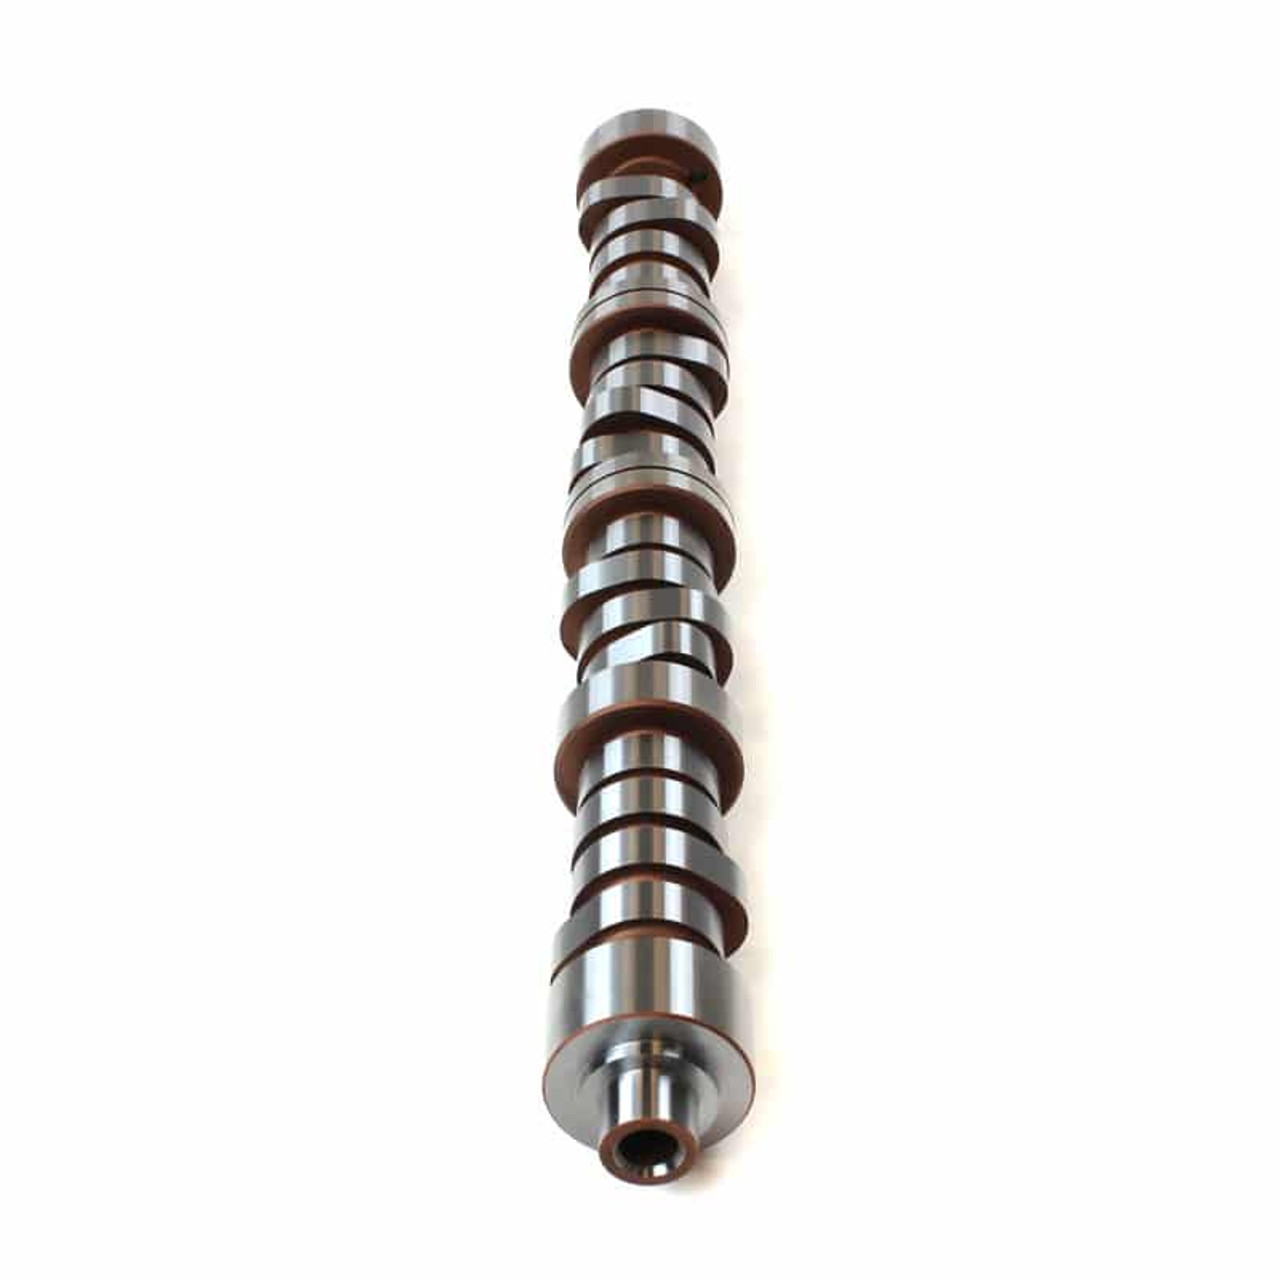 Industrial Injection Duramax Alternate Firing Billet Camshafts for 2007.5 to 2010 6.6L LMM Duramax Stage 1 Second View